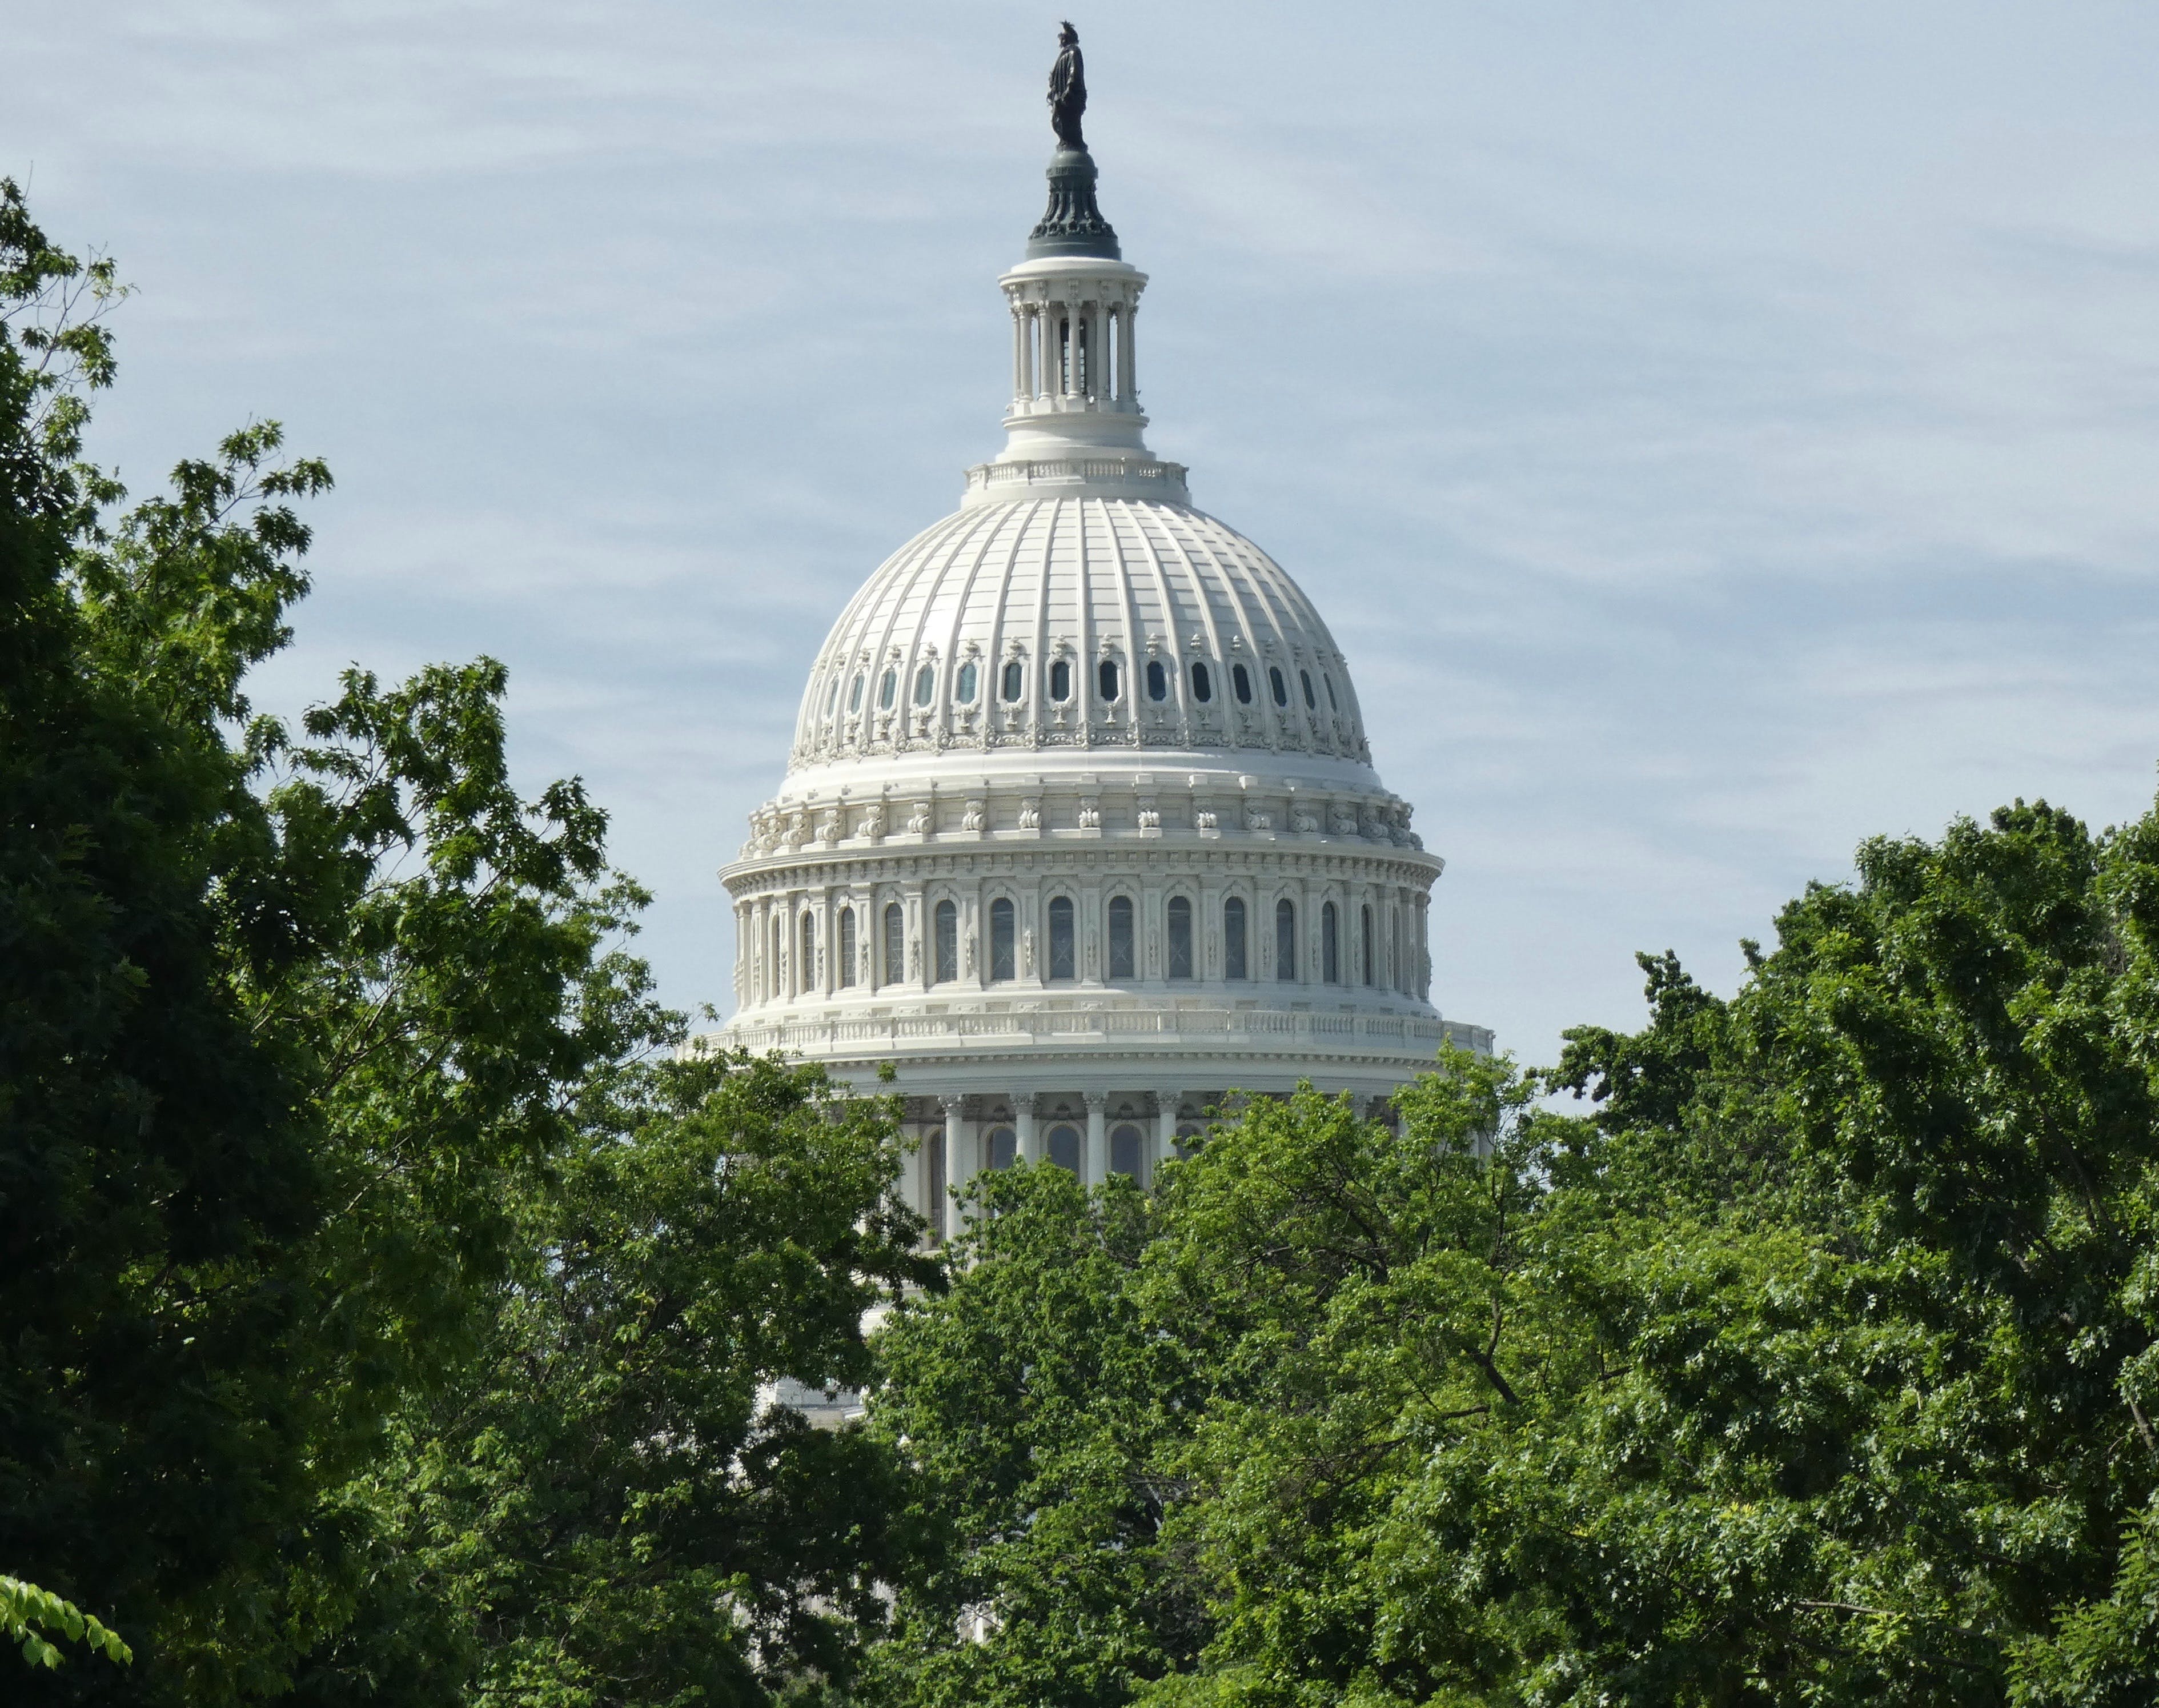 Image of the dome of the US Capitol building. The sky is blue and there are trees in the foreground.